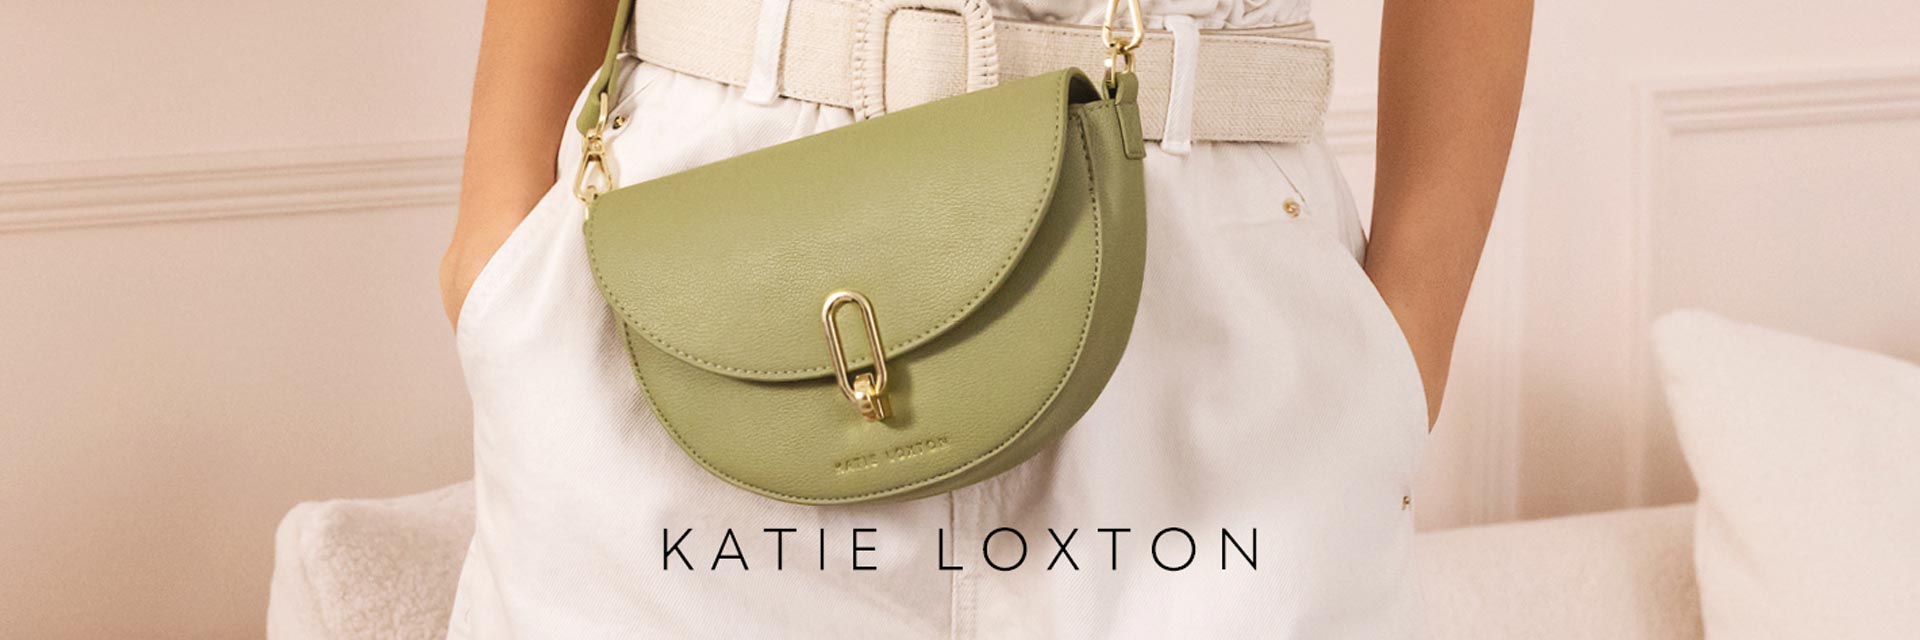 occasions2celebrate Katie Loxton bags